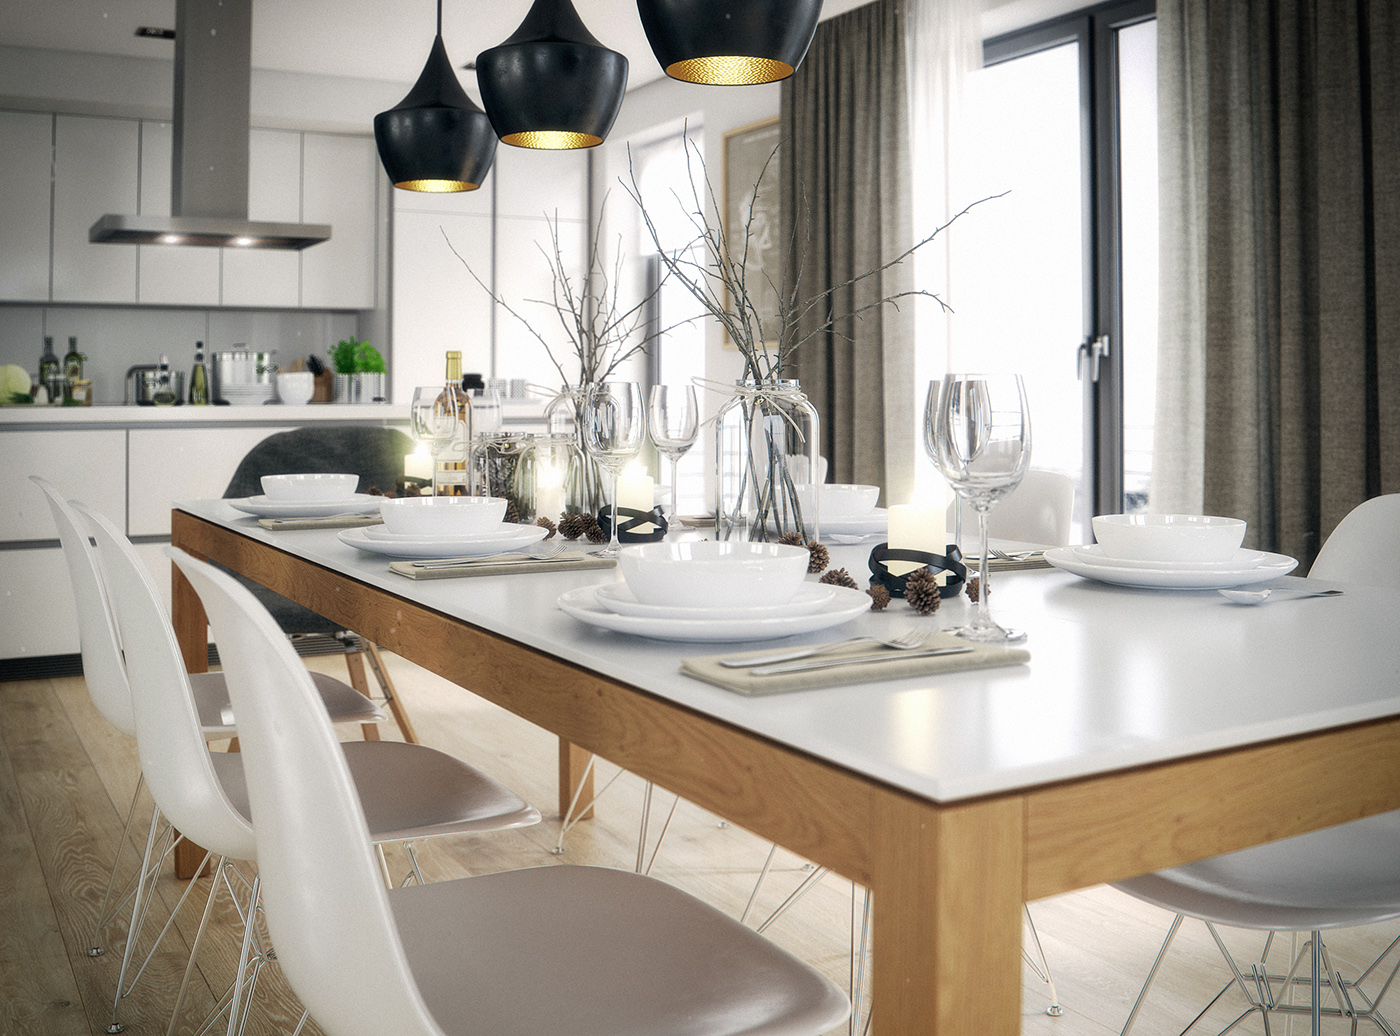 cinema 4d vray germany appartement 3D rendering CGI kitchen bulthaup EAMES